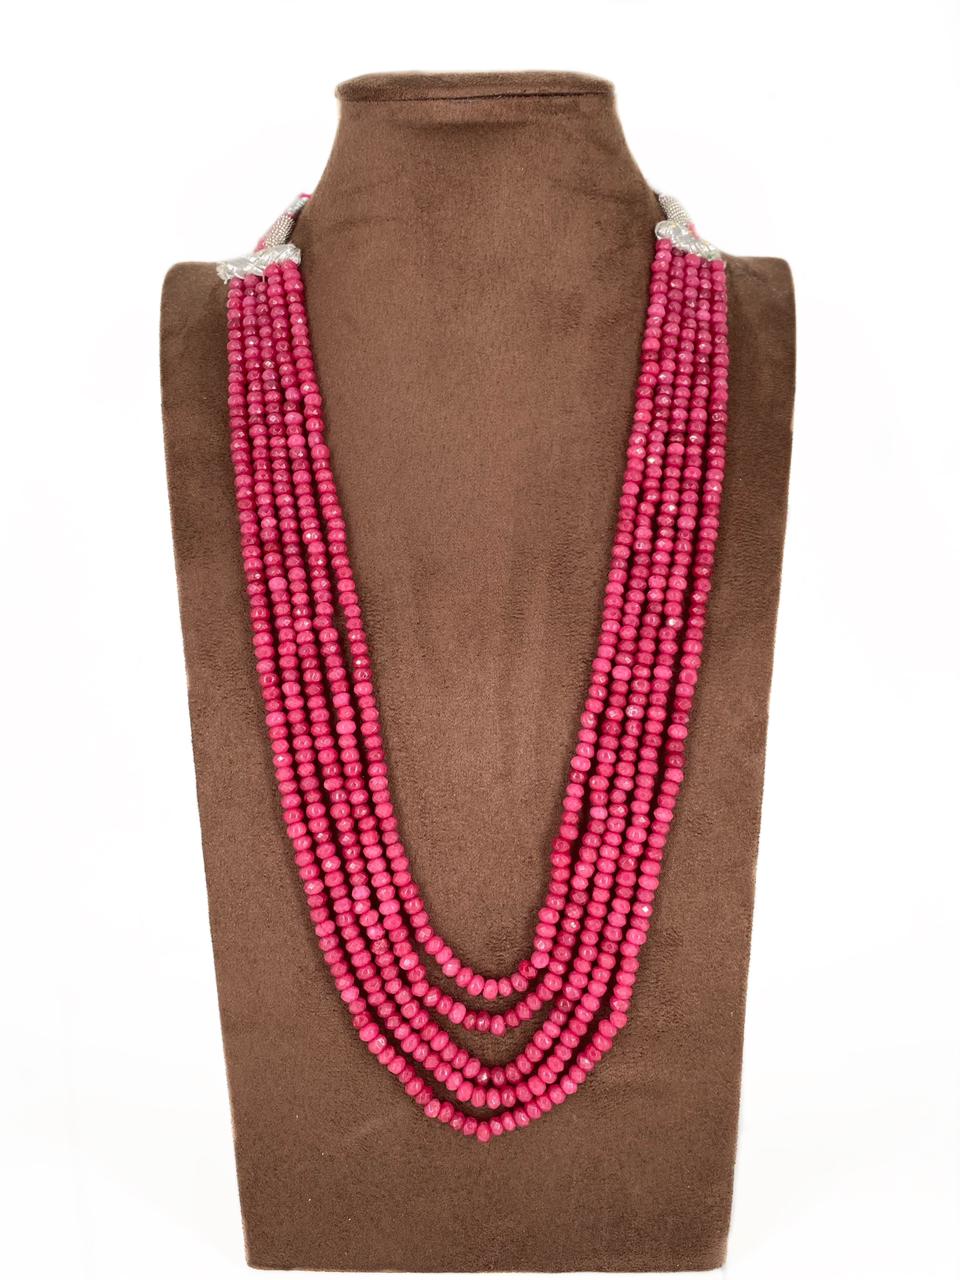 Multilayered Semi Precious Pink Jade Beads Necklace By Gehna Shop Beads Jewellery